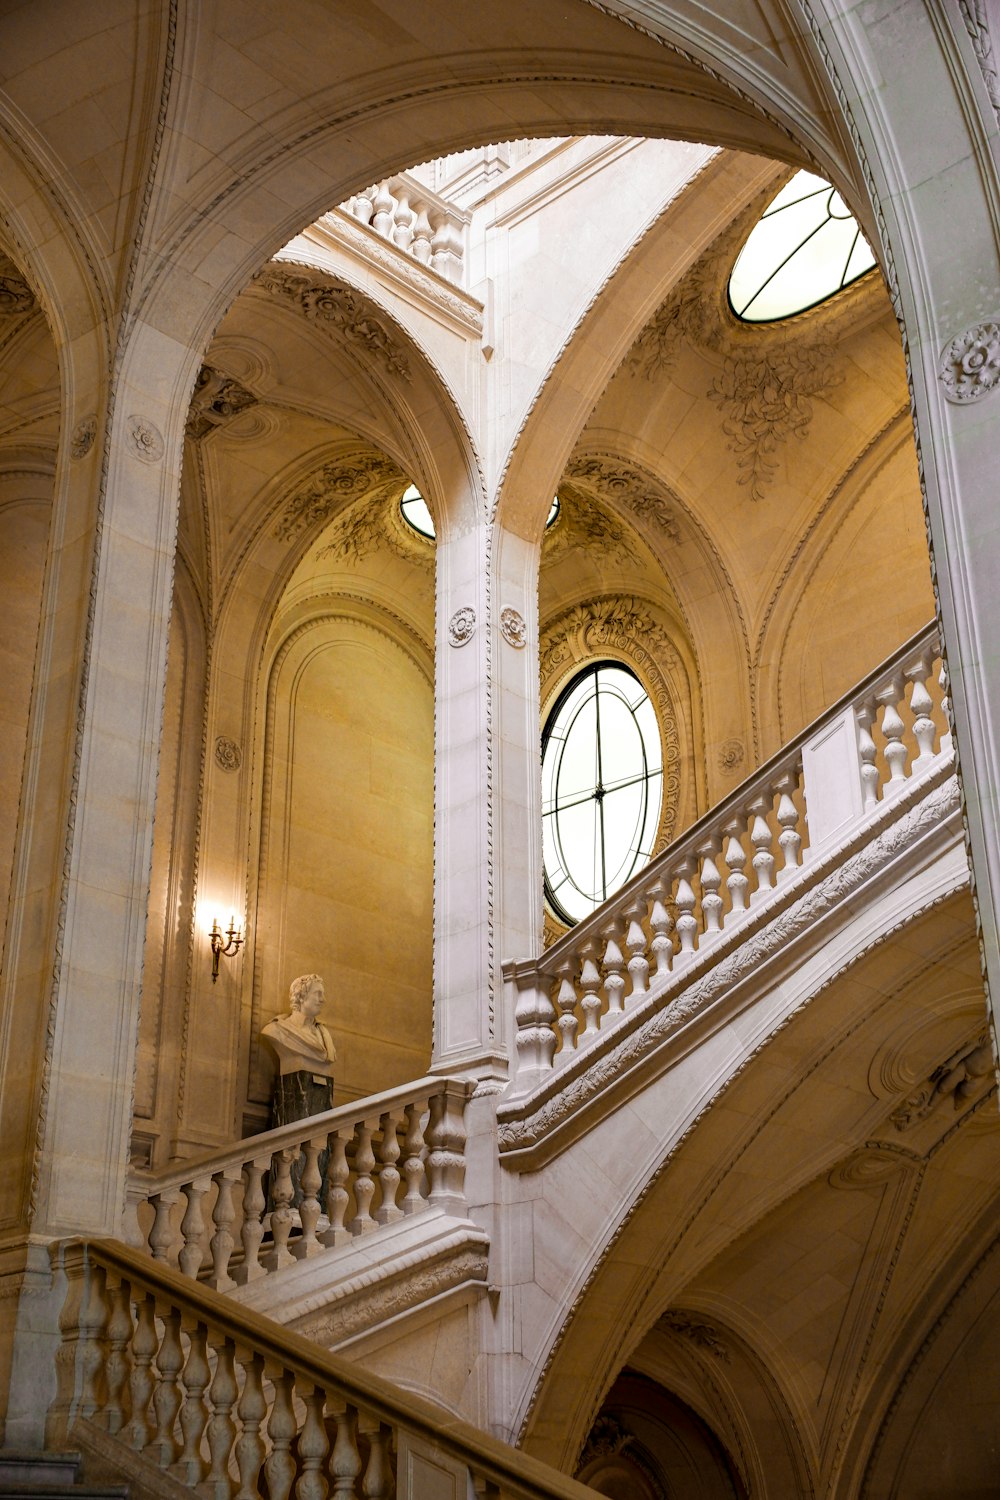 a staircase in a large building with arched windows